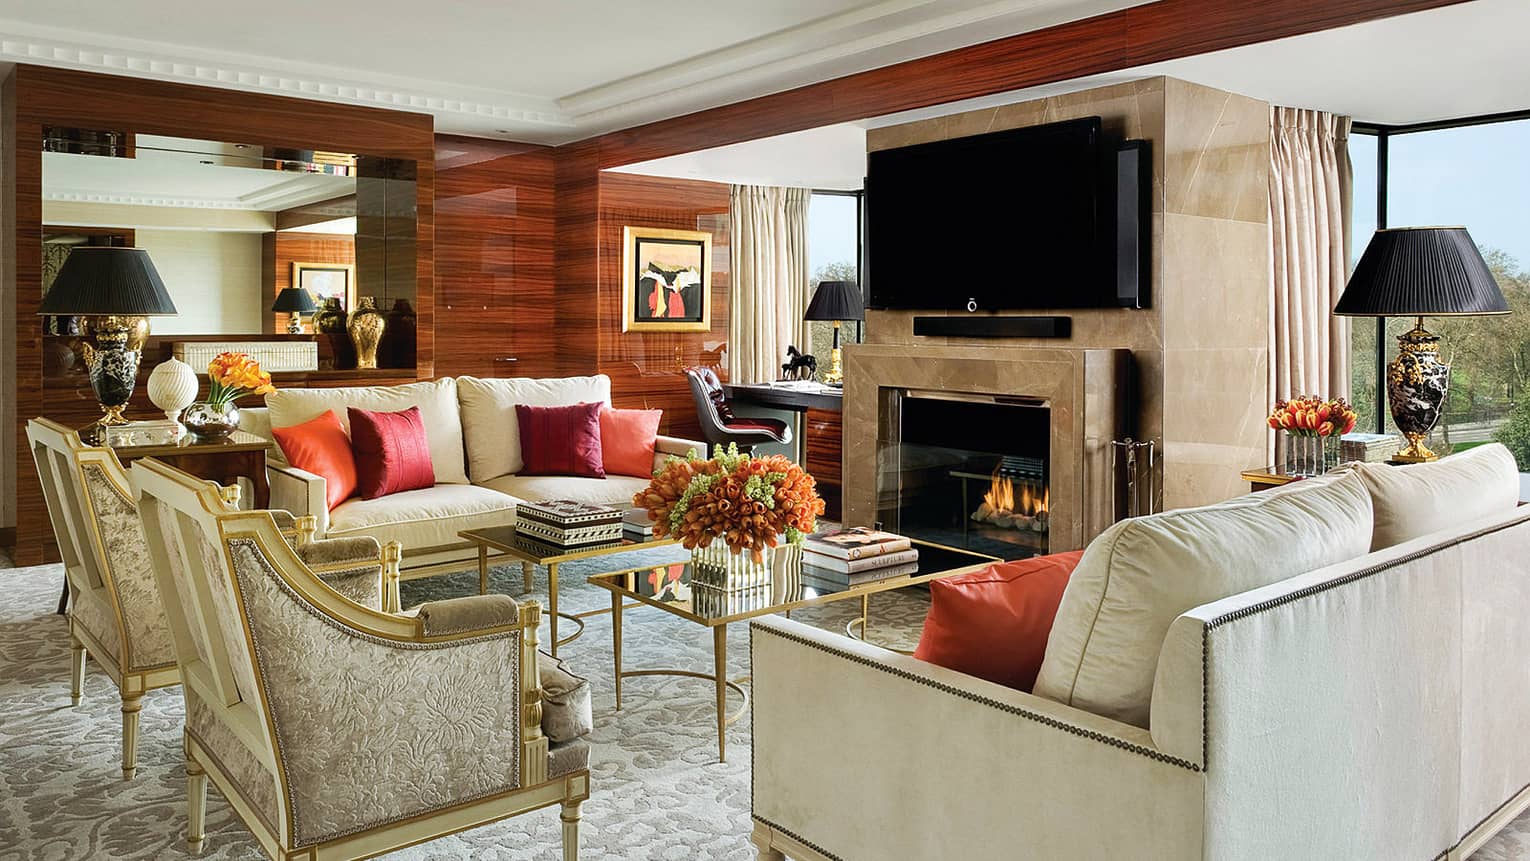 Presidential Suite London, displaying elegant white sofas, armchairs by marble fireplace, desk, windows